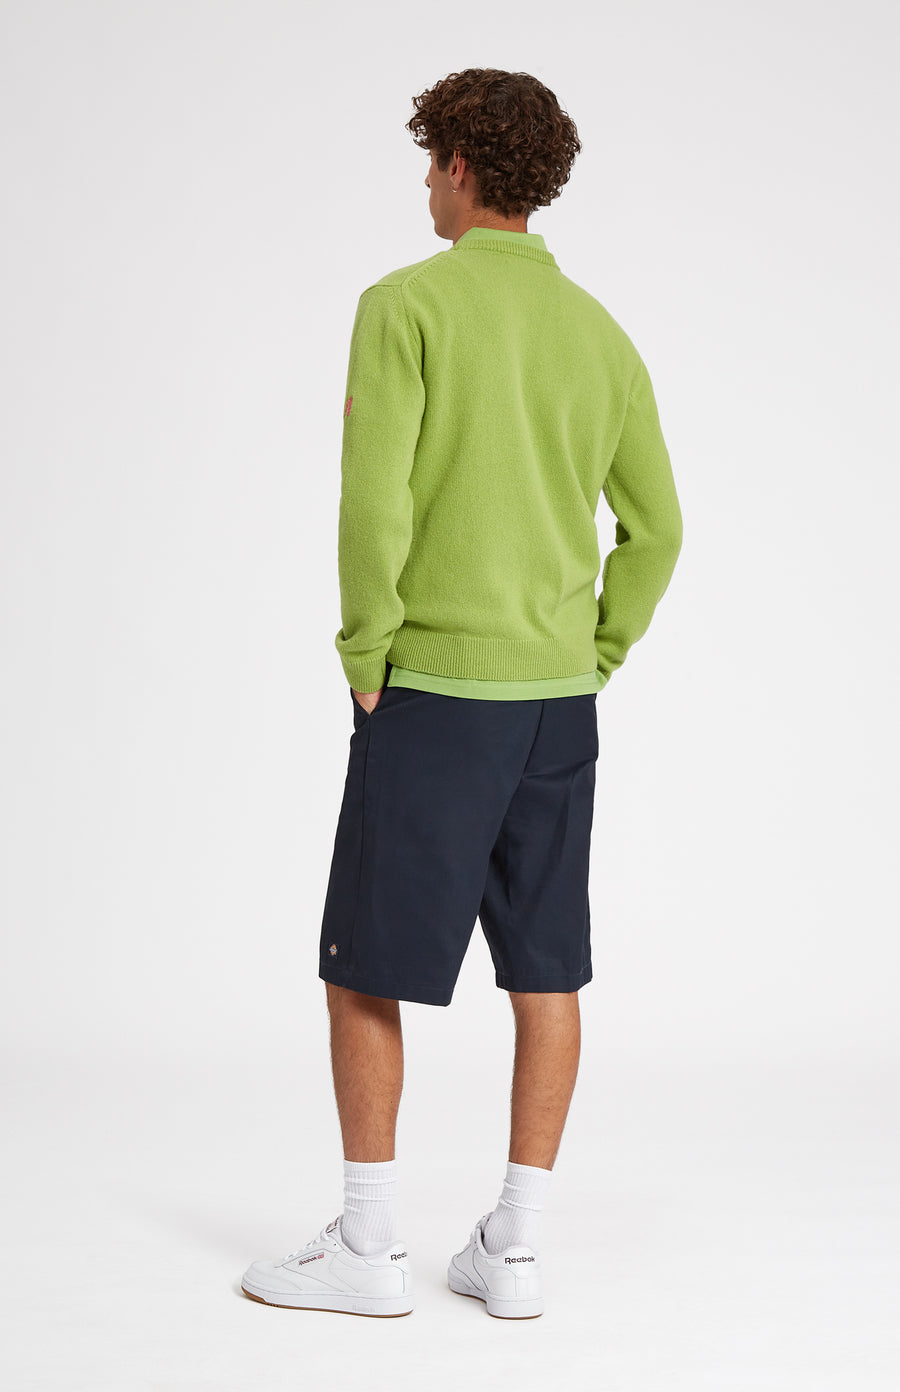 Unisex heritage diamond motif golf jumper in Green and Ivory on male model - Pringle of Scotland